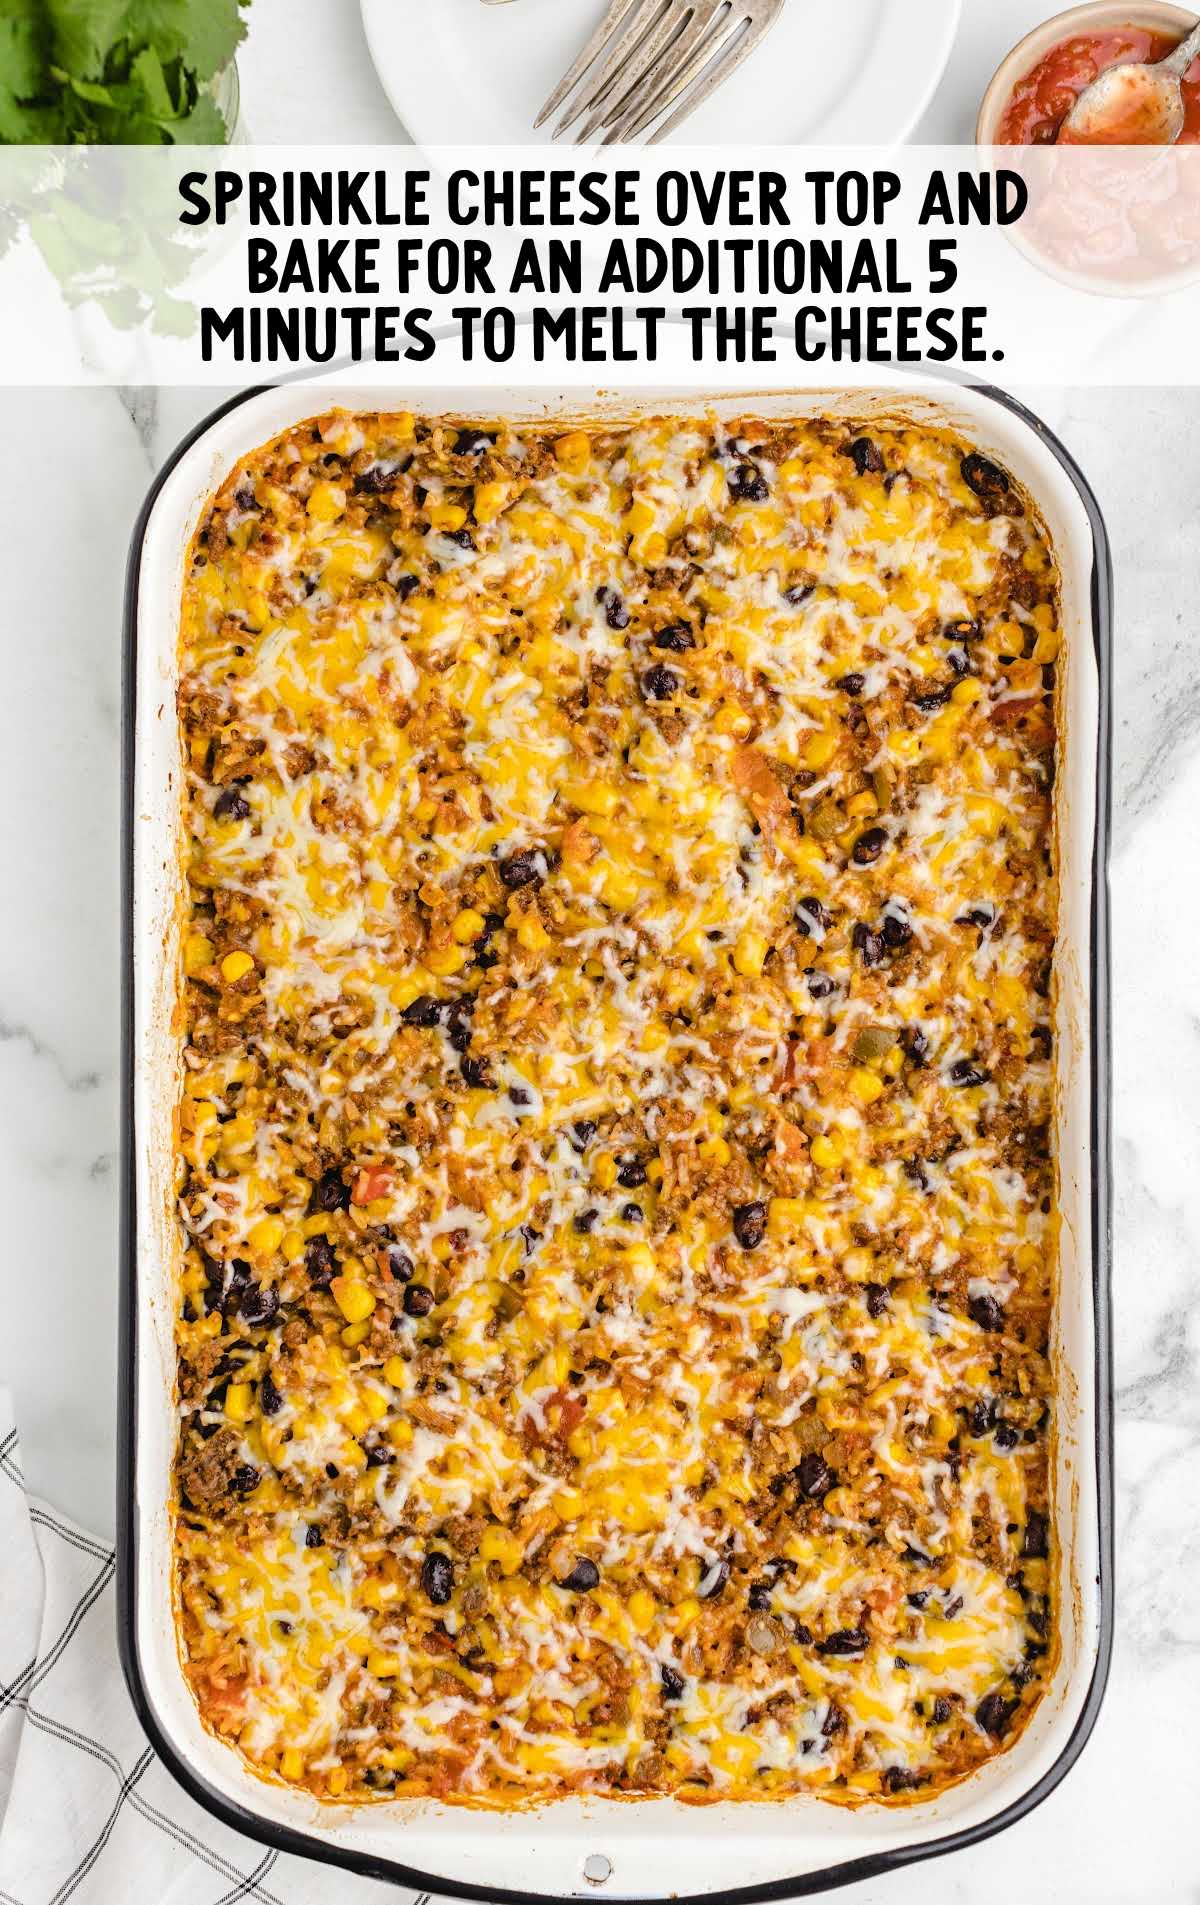 shredded cheese placed on top of the casserole then baked